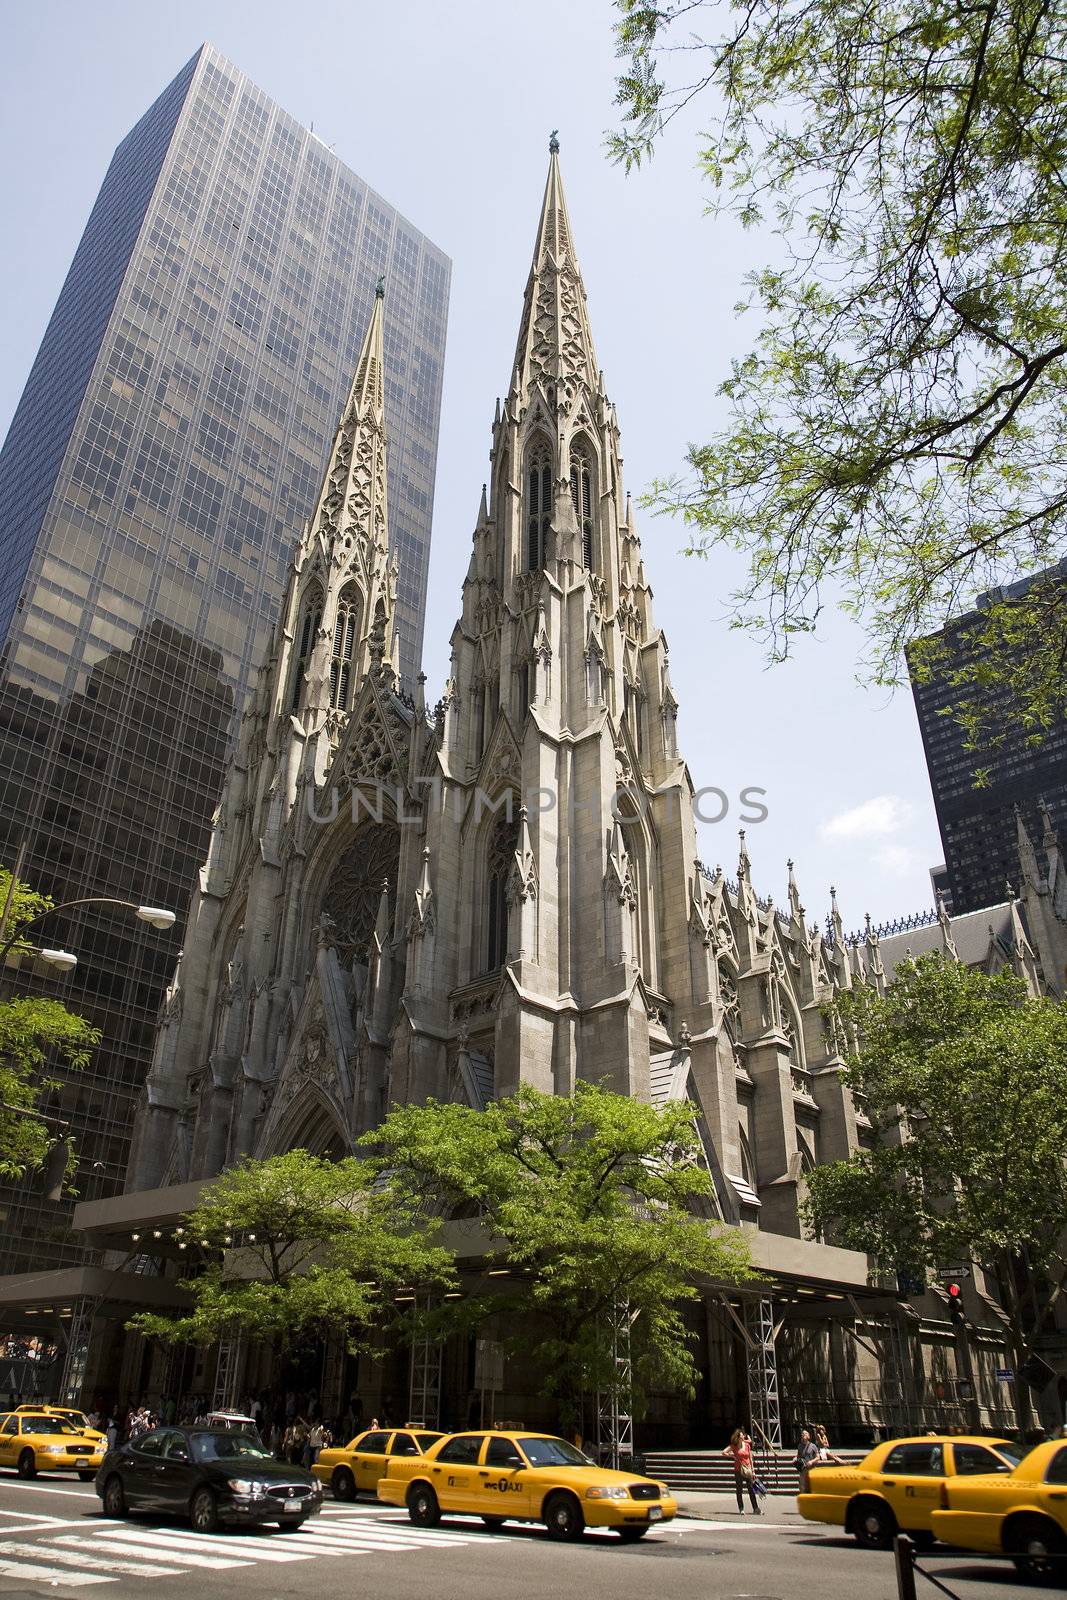 Saint Patrick's cathedral in New York.